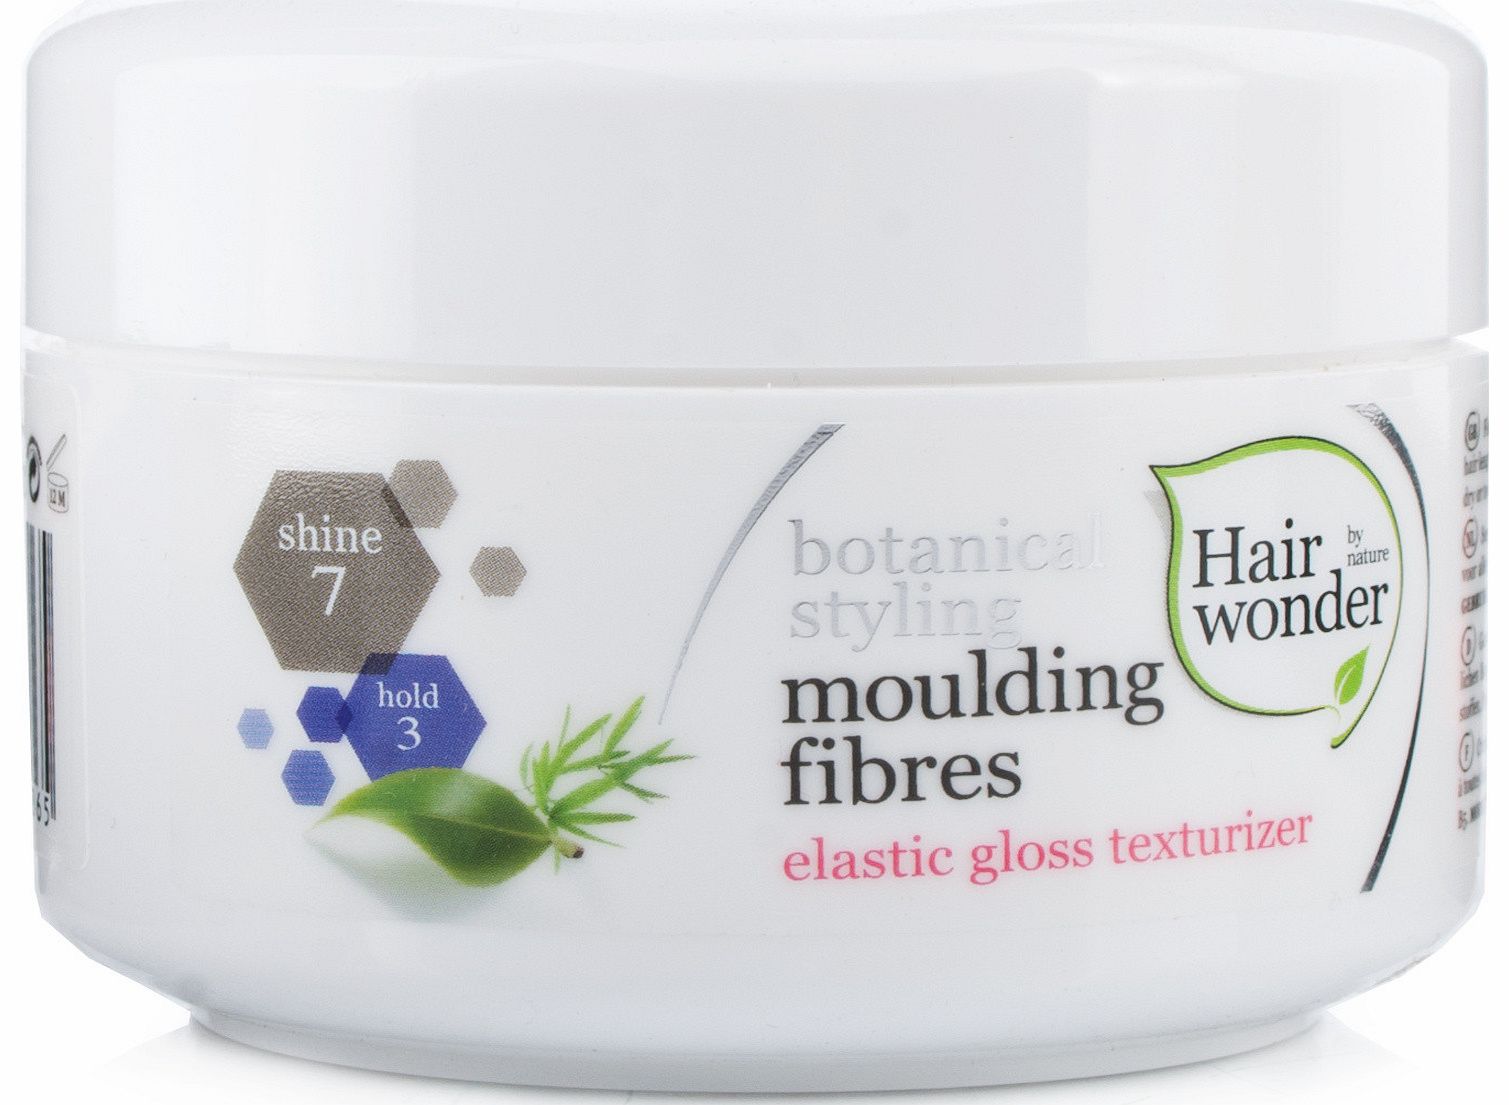 Hair Wonder Botanical Styling Moulding Fibres: Elastic gloss texturiser cream for a flexible hold. Provides extra body and volume for all hair lengths. Enriched with 8 certified organic ingredients, Phytokeratin and Provitamin B5. For optimum daily c